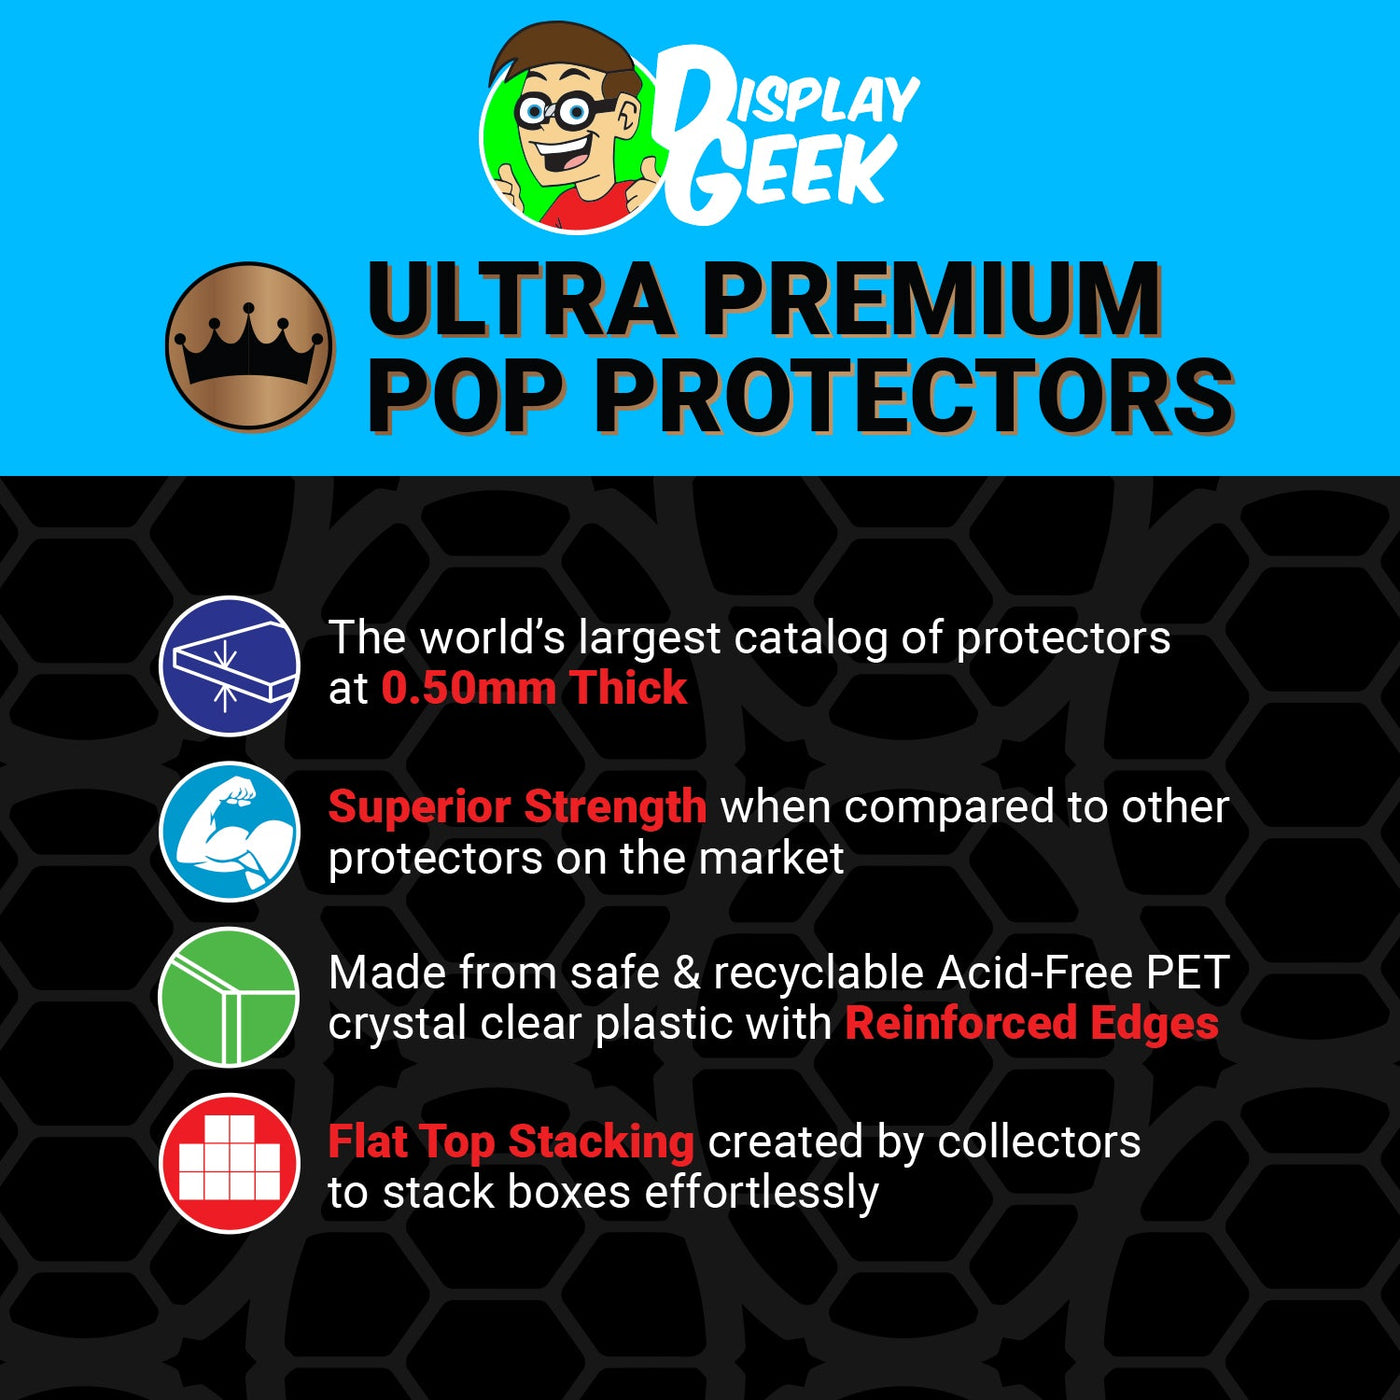 Pop Protector for Freddy Funko as Hulk SDCC LE 144 on The Protector Guide App by Display Geek